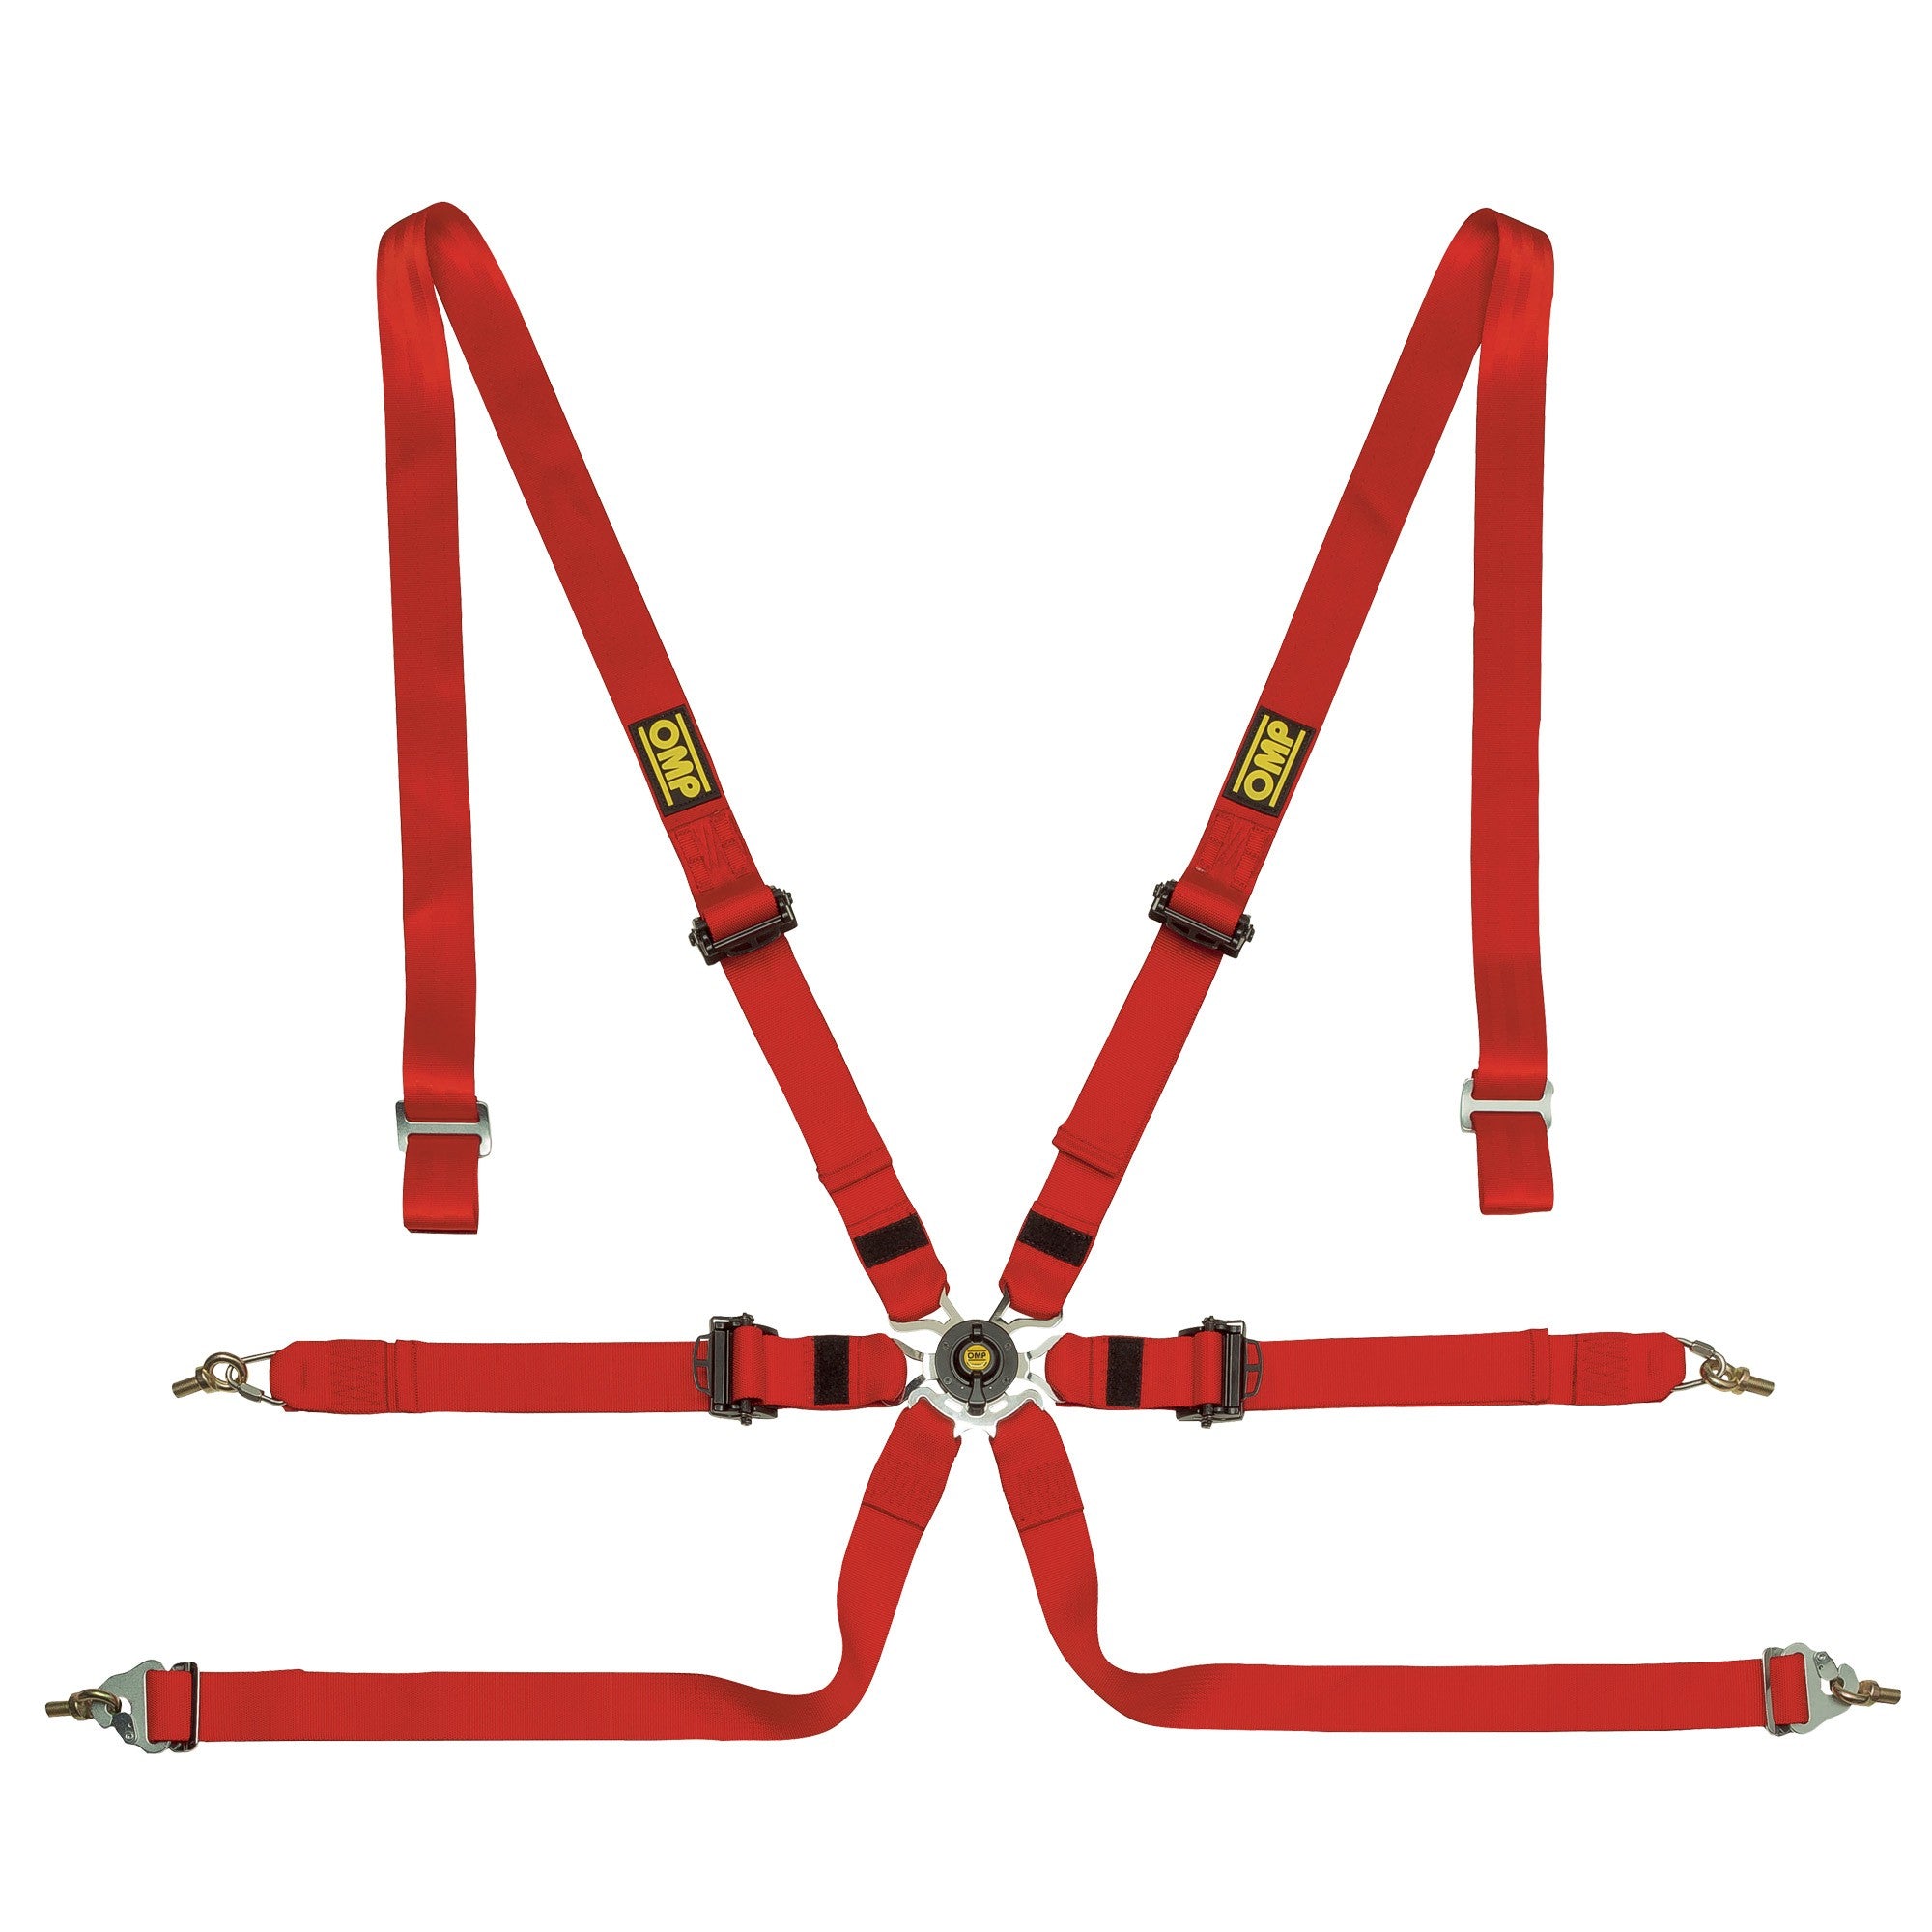 OMP One 2 Harness - Saferacer